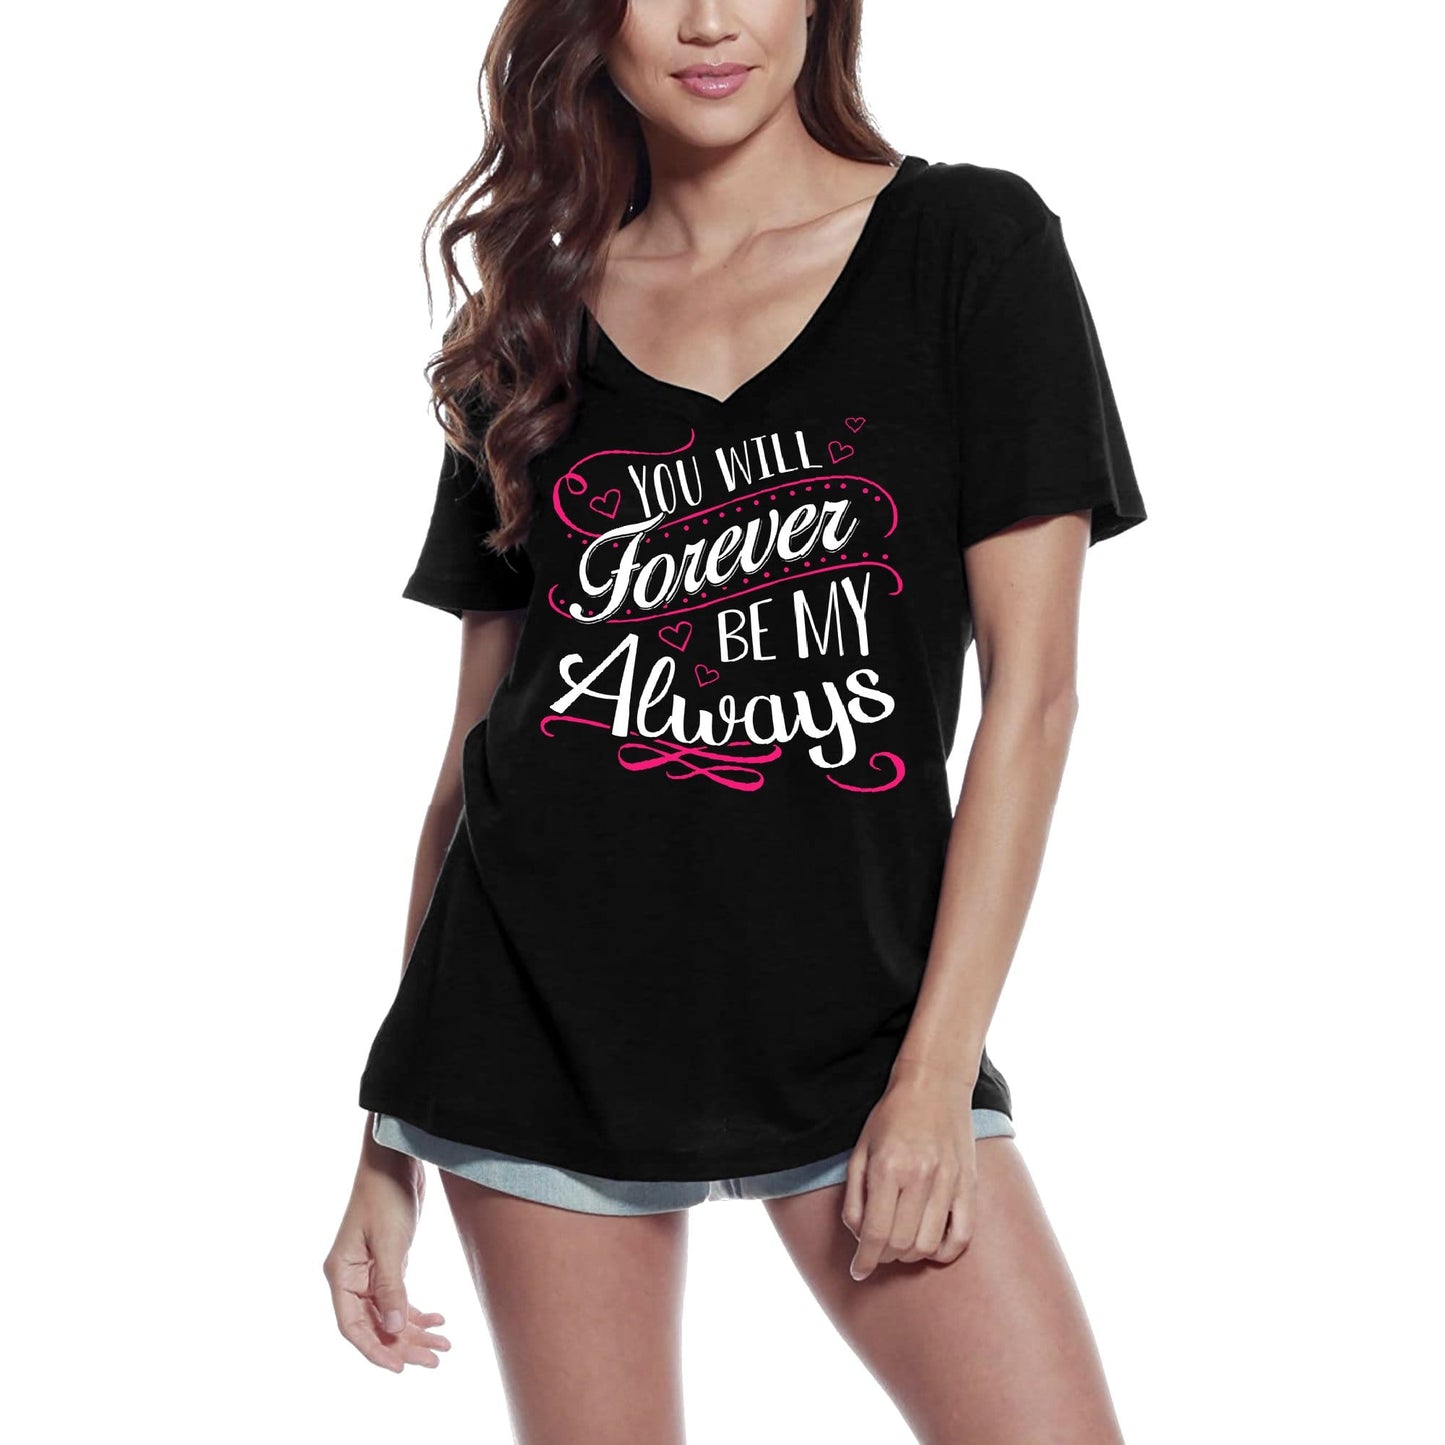 ULTRABASIC Women's T-Shirt You Will Forever Be My Always - Valentine's Day Short Sleeve Graphic Tees Tops